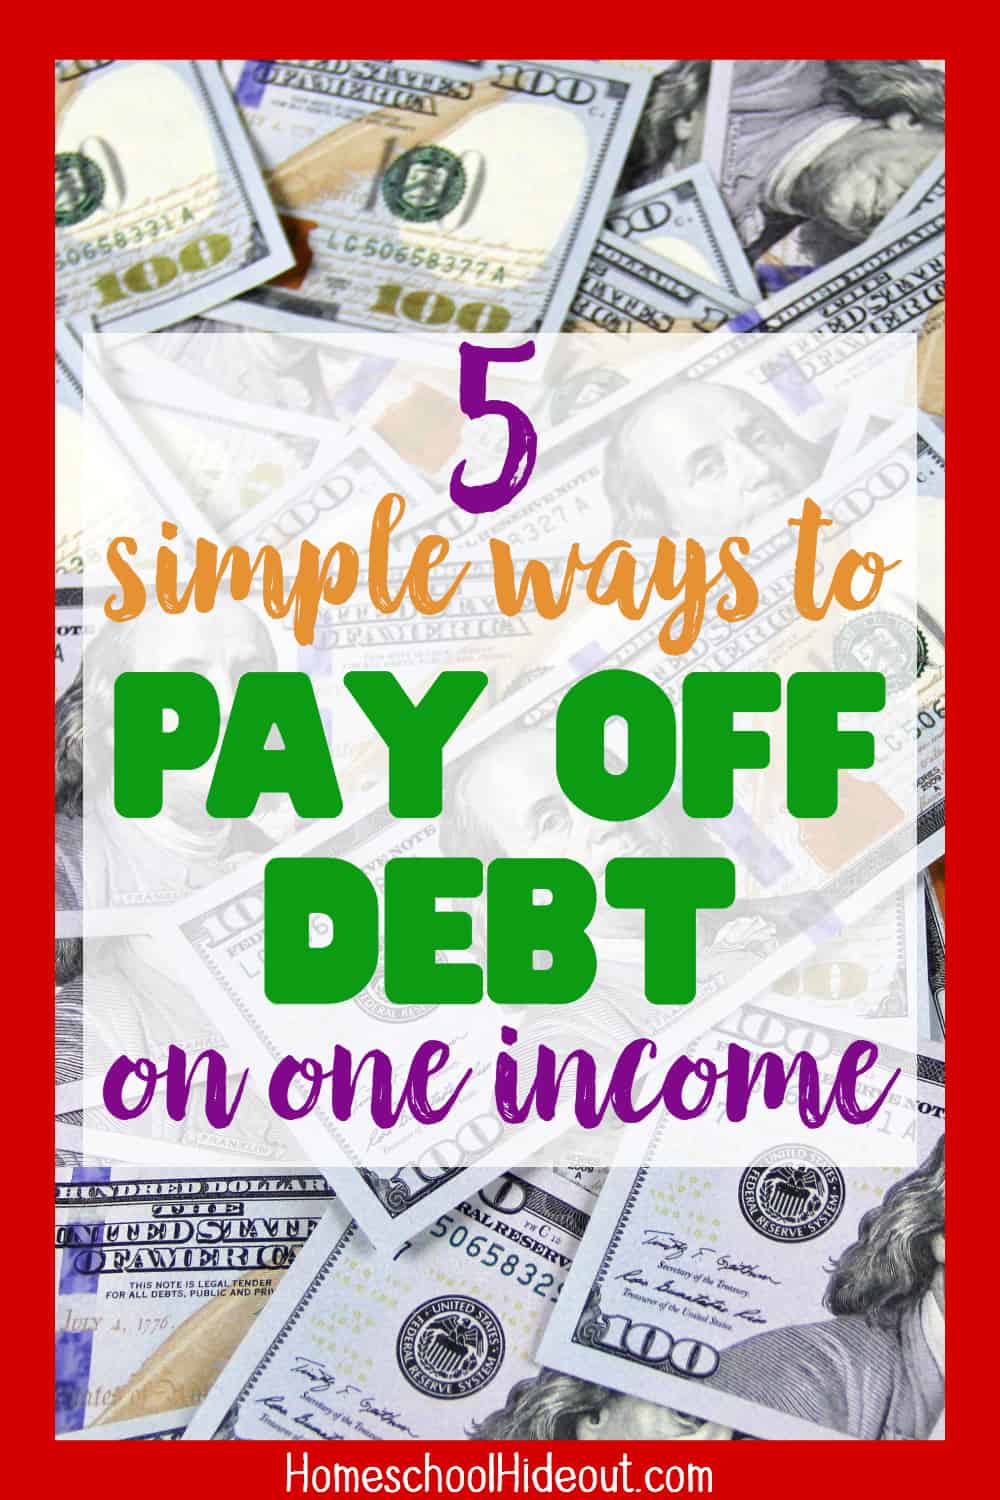 I thought it was impossible to pay of debt on one income but with these tips, I can actually do it! #4 is my favorite!!!